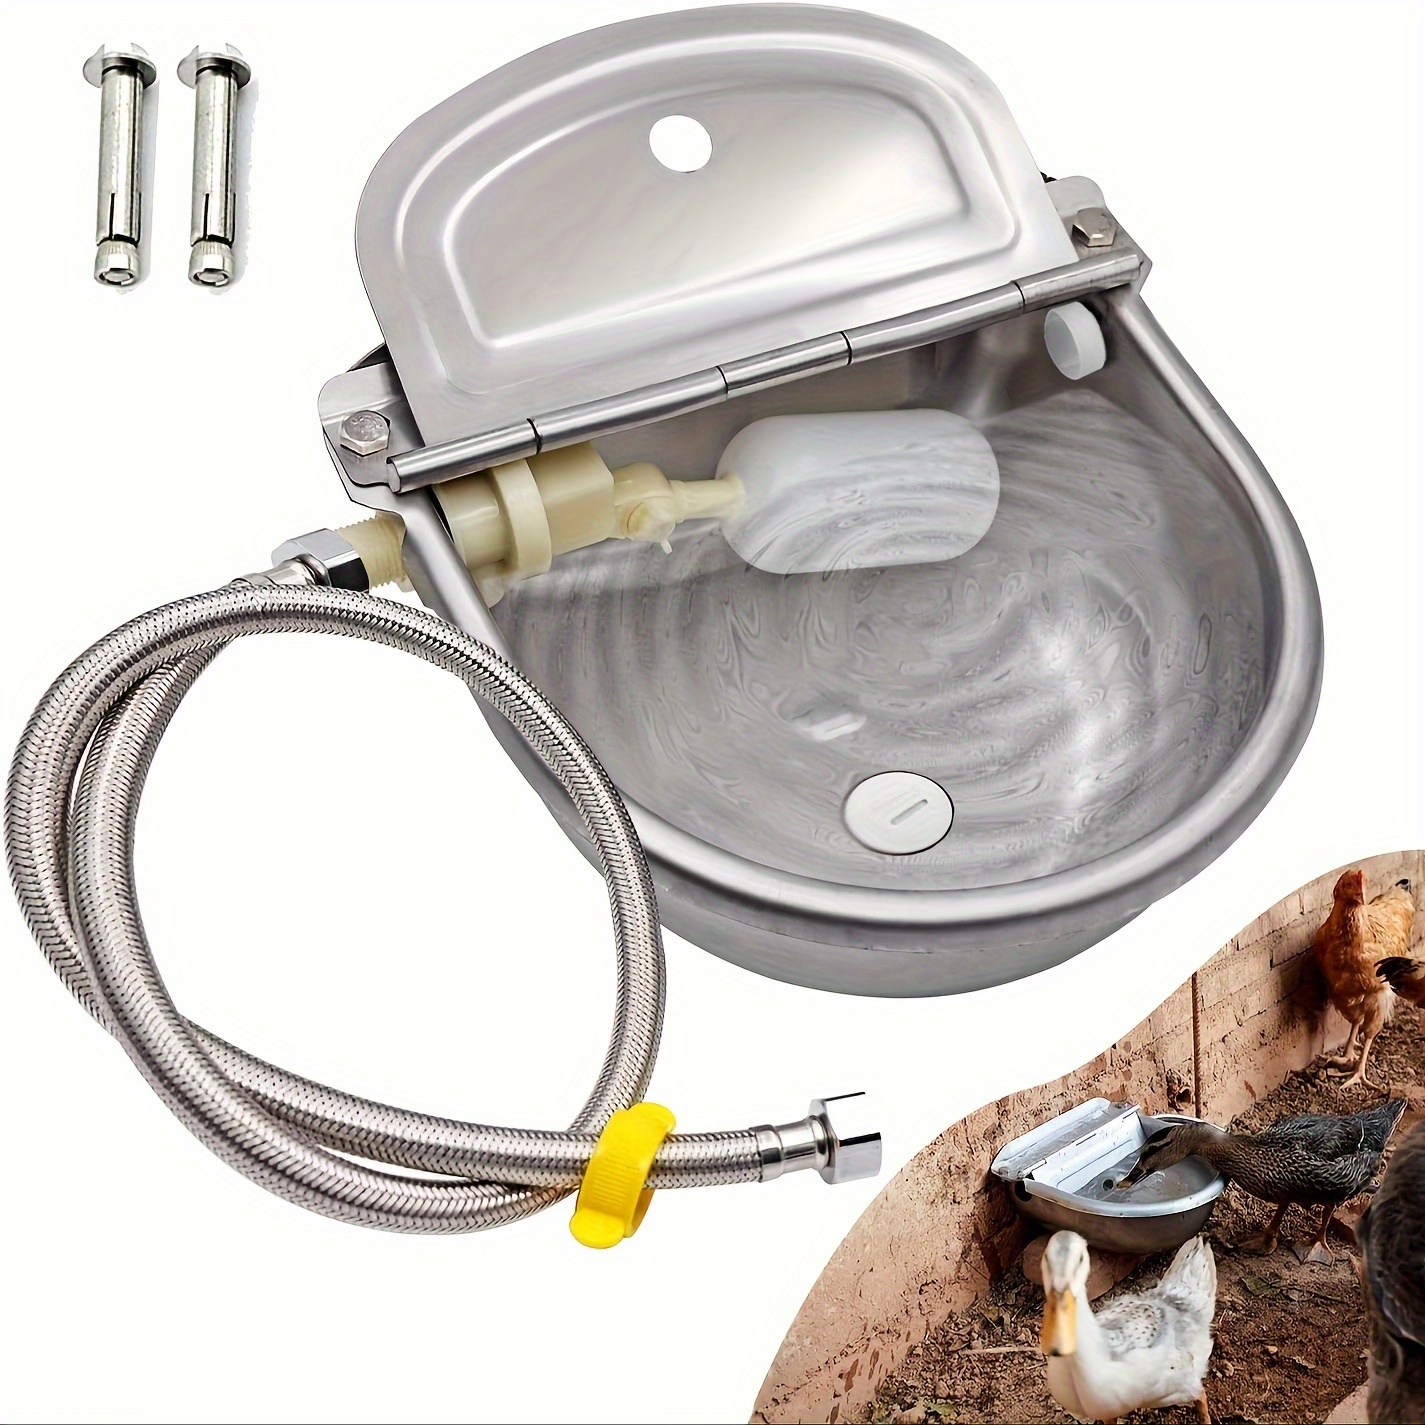 

1 Pack, Automatic Stainless Steel Livestock Water Bowl, 3l Capacity, Upgraded Longer Design, Self-filling Drinking Basin For All Size Animals, Easy-to-clean With Outfall, Durable Farm Equipment